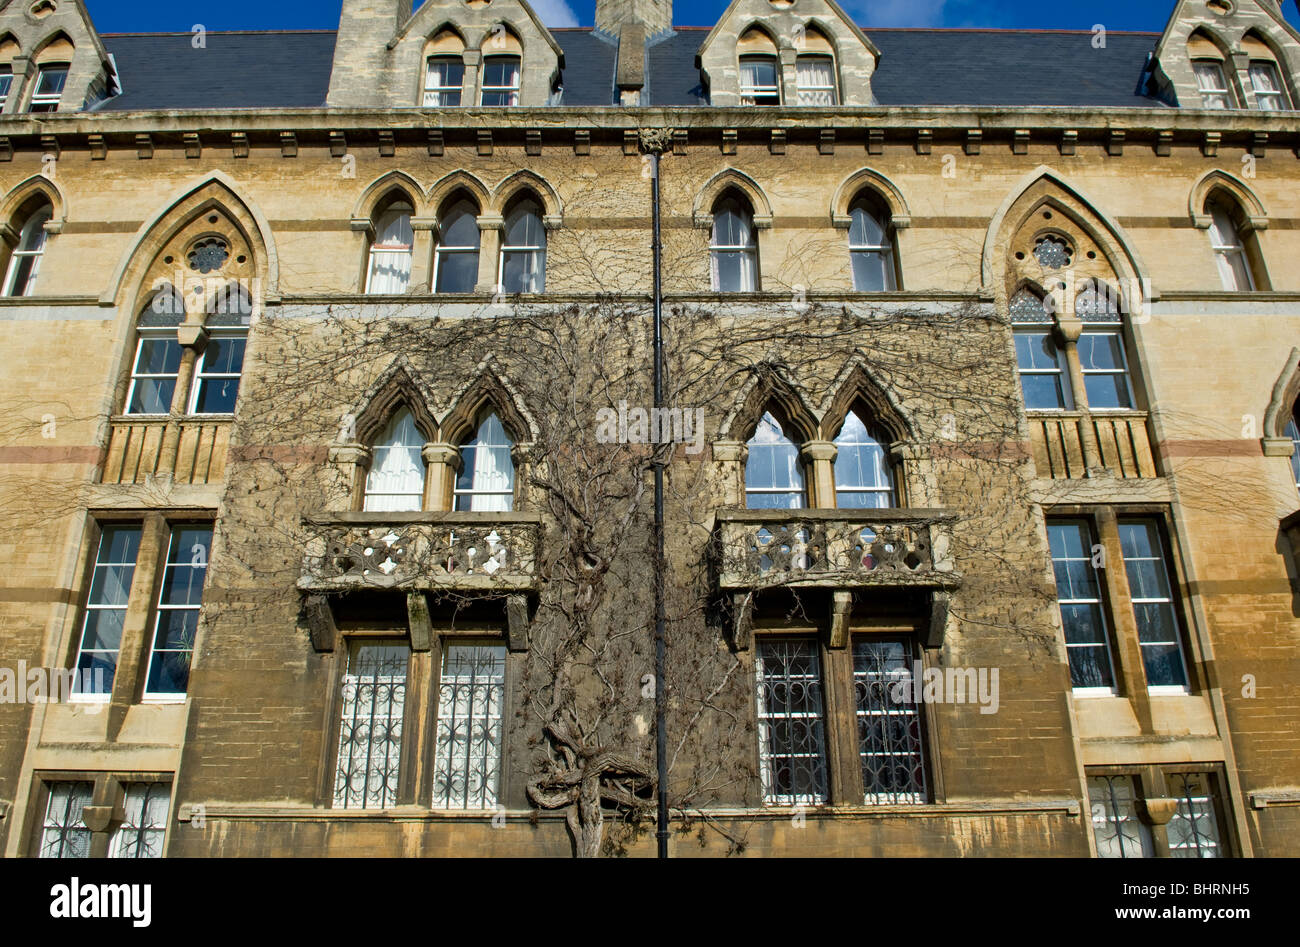 The Gothic style windows of the Meadow building at Christ Church College, Oxford University. Stock Photo